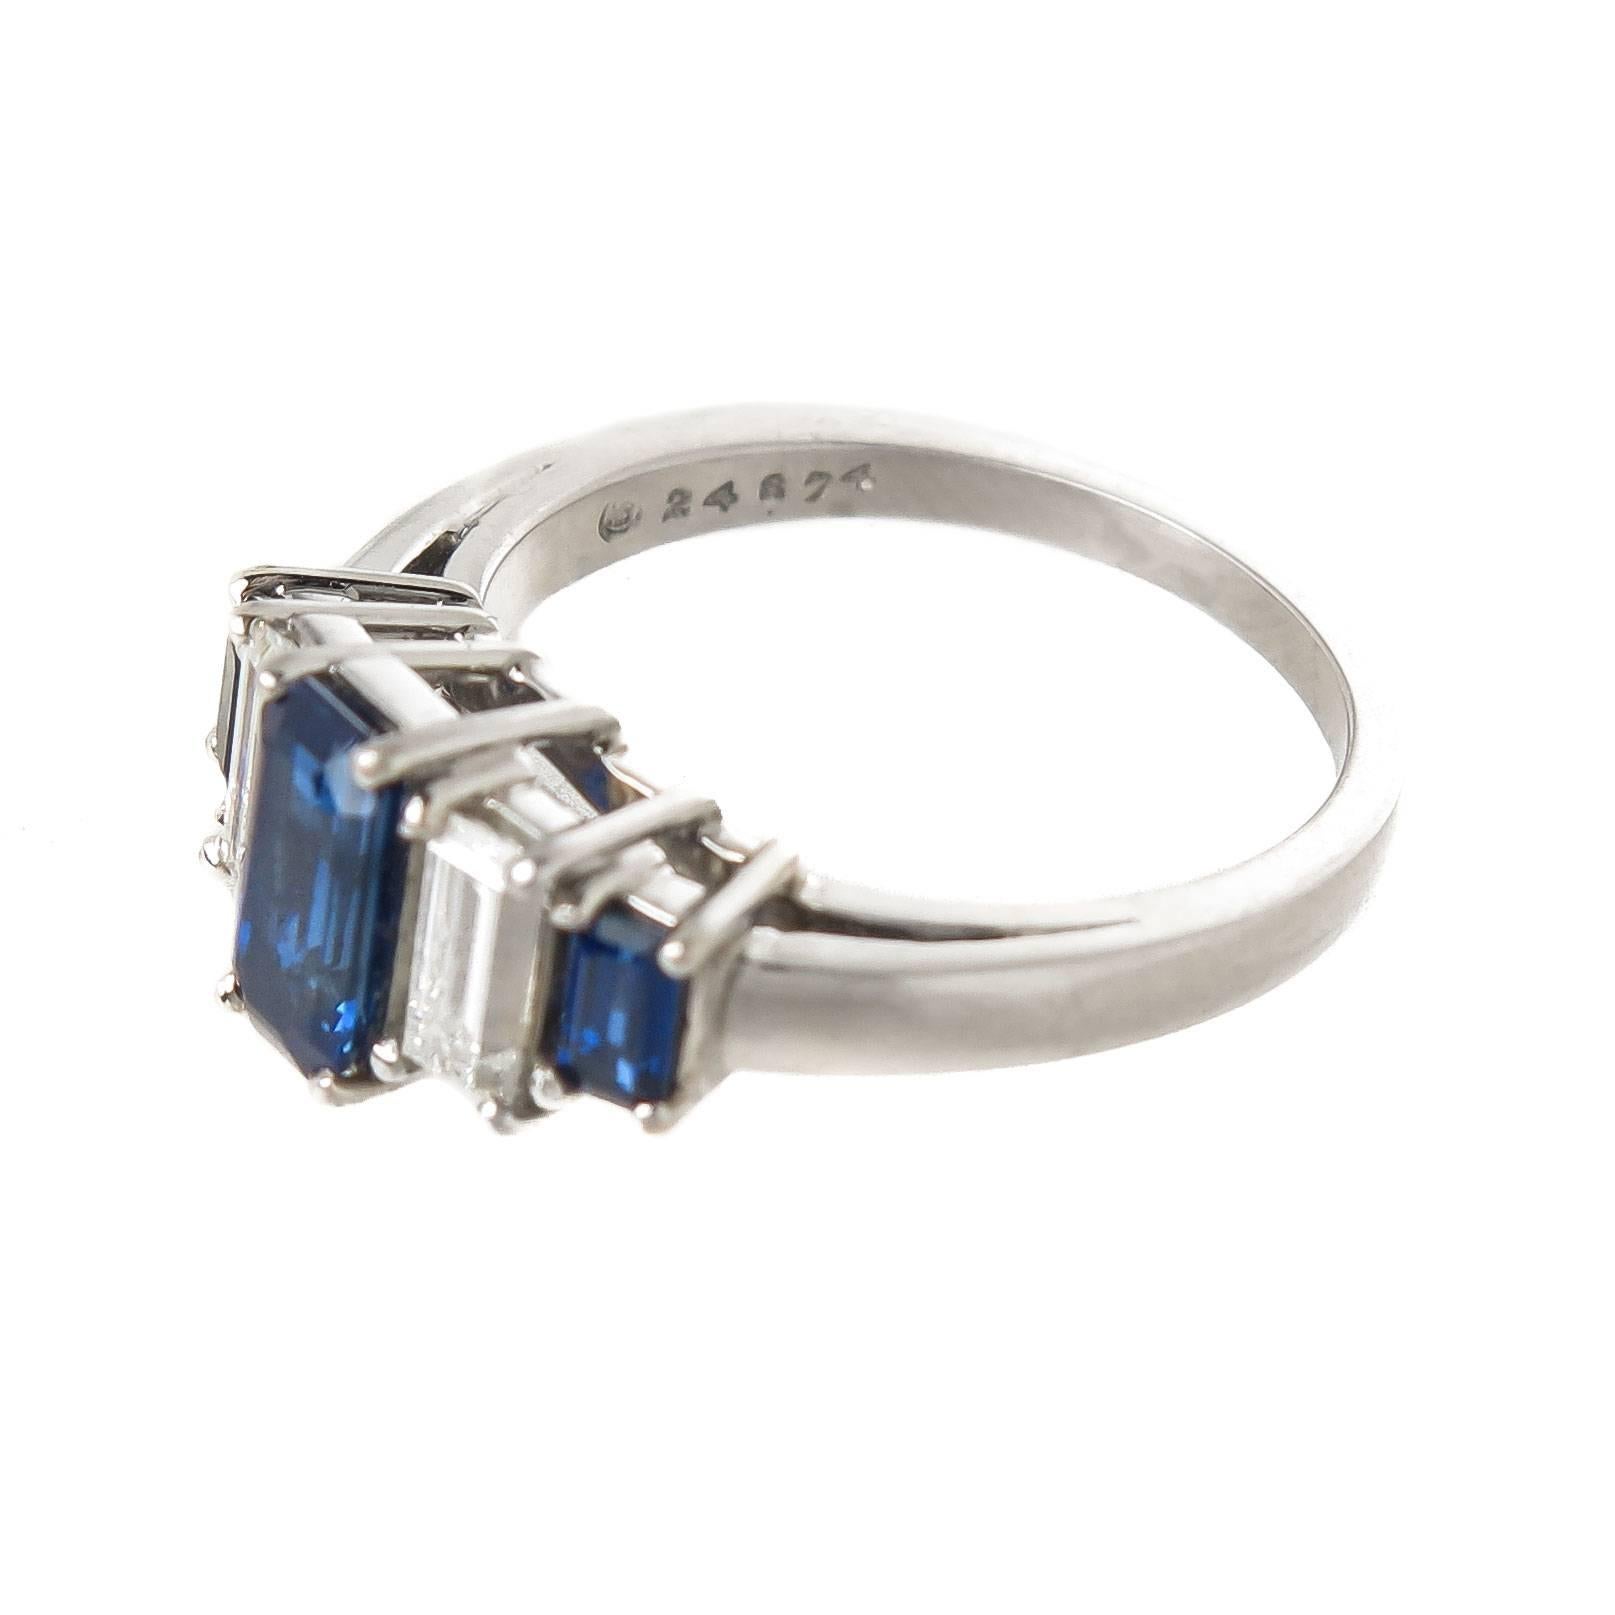 Circa 1960 Oscar Heyman Platinum Art Deco Style Ring, Having 3 Fine Color Step cut Sapphires totaling 1.15 Carats and 2 Step cut Diamonds totaling .53 Carat.  Finger size = 6. Measuring 1/2 inch across the top.
